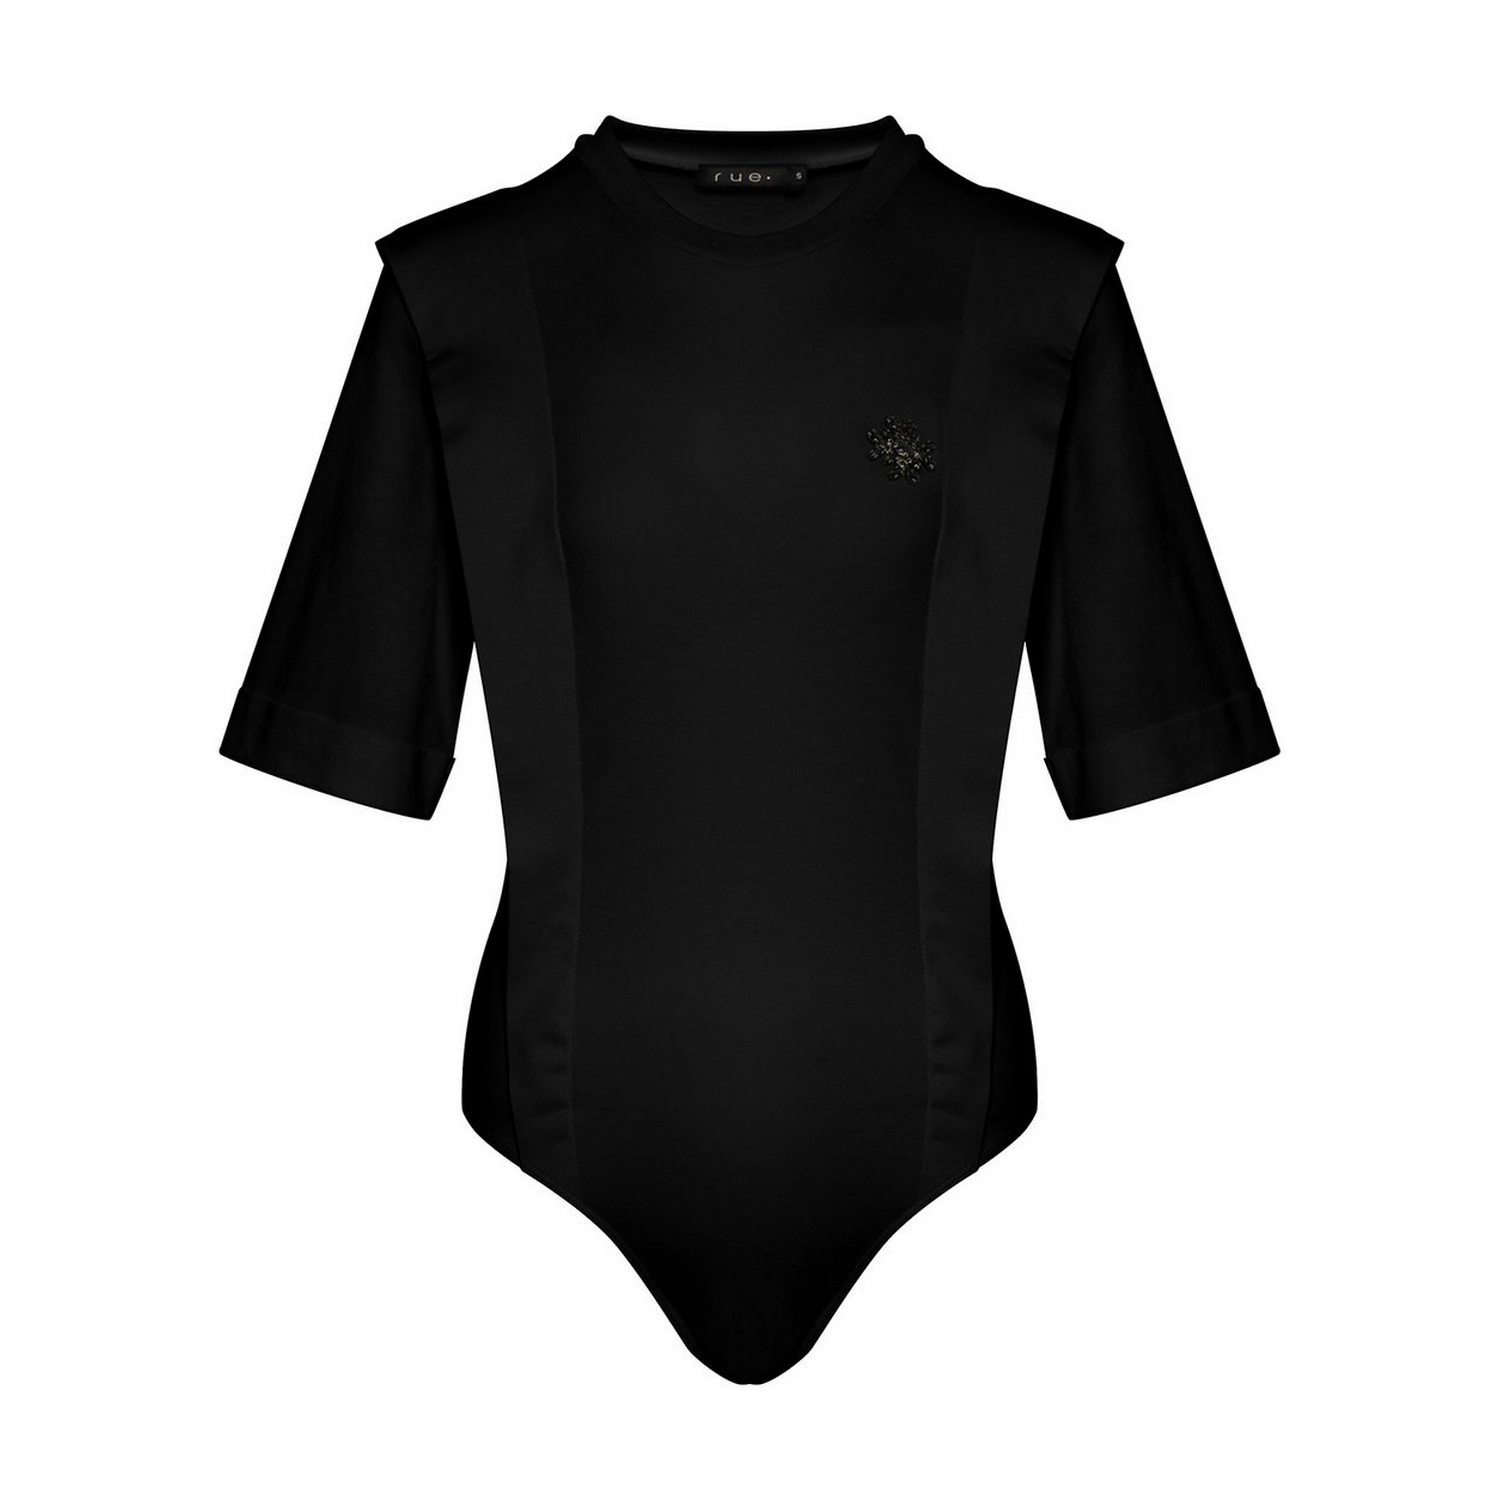 Buy self. Black Smoothing Comfort Short Sleeve Body from the Next